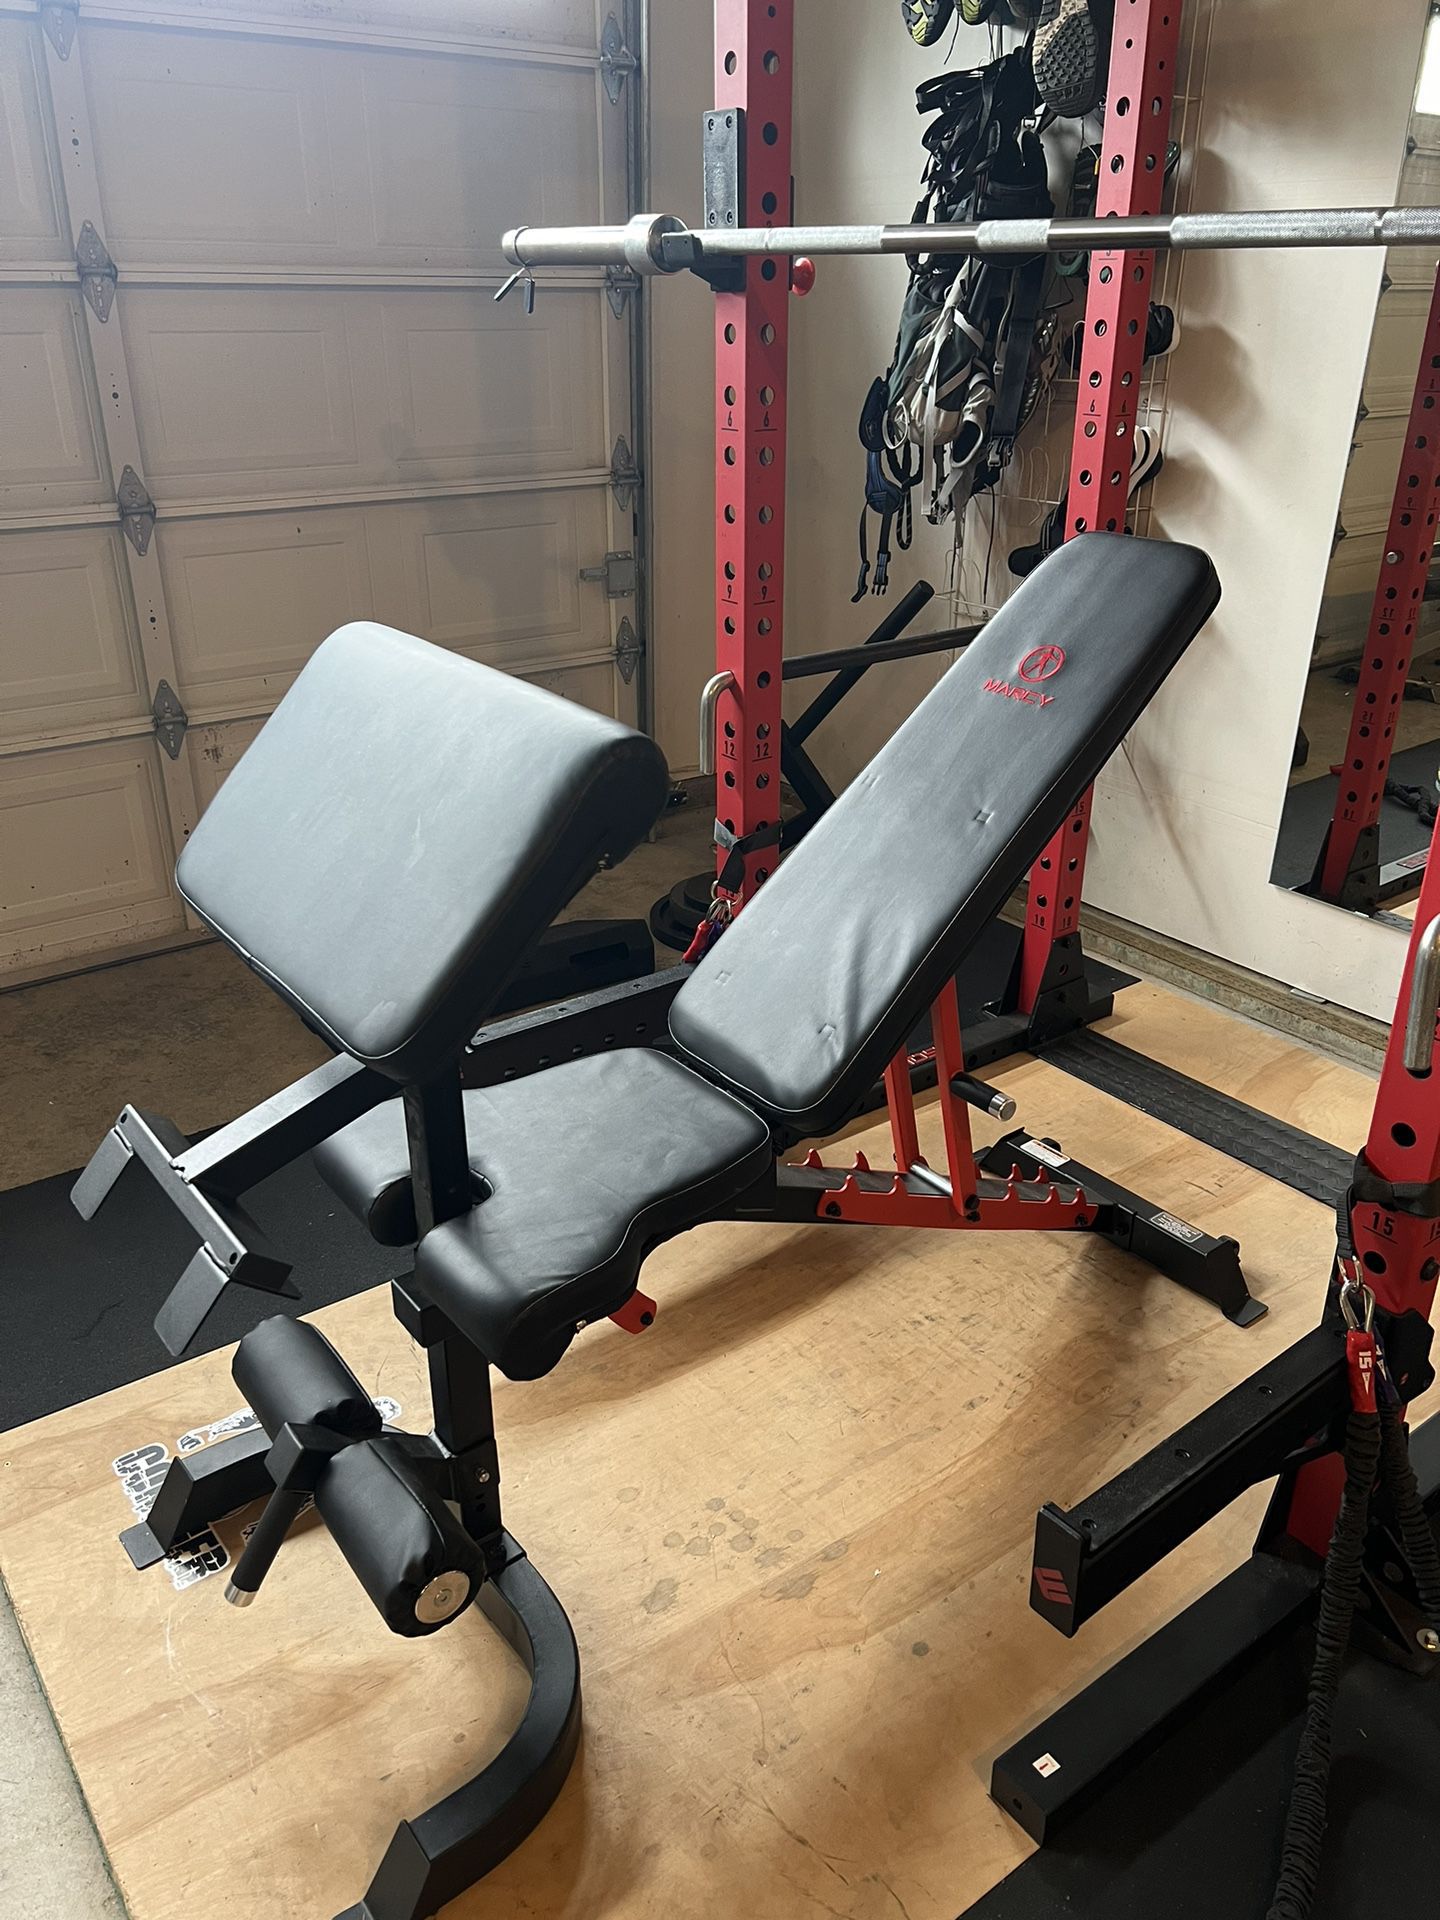 Marcy adjustable Weight Bench with Preacher Curl